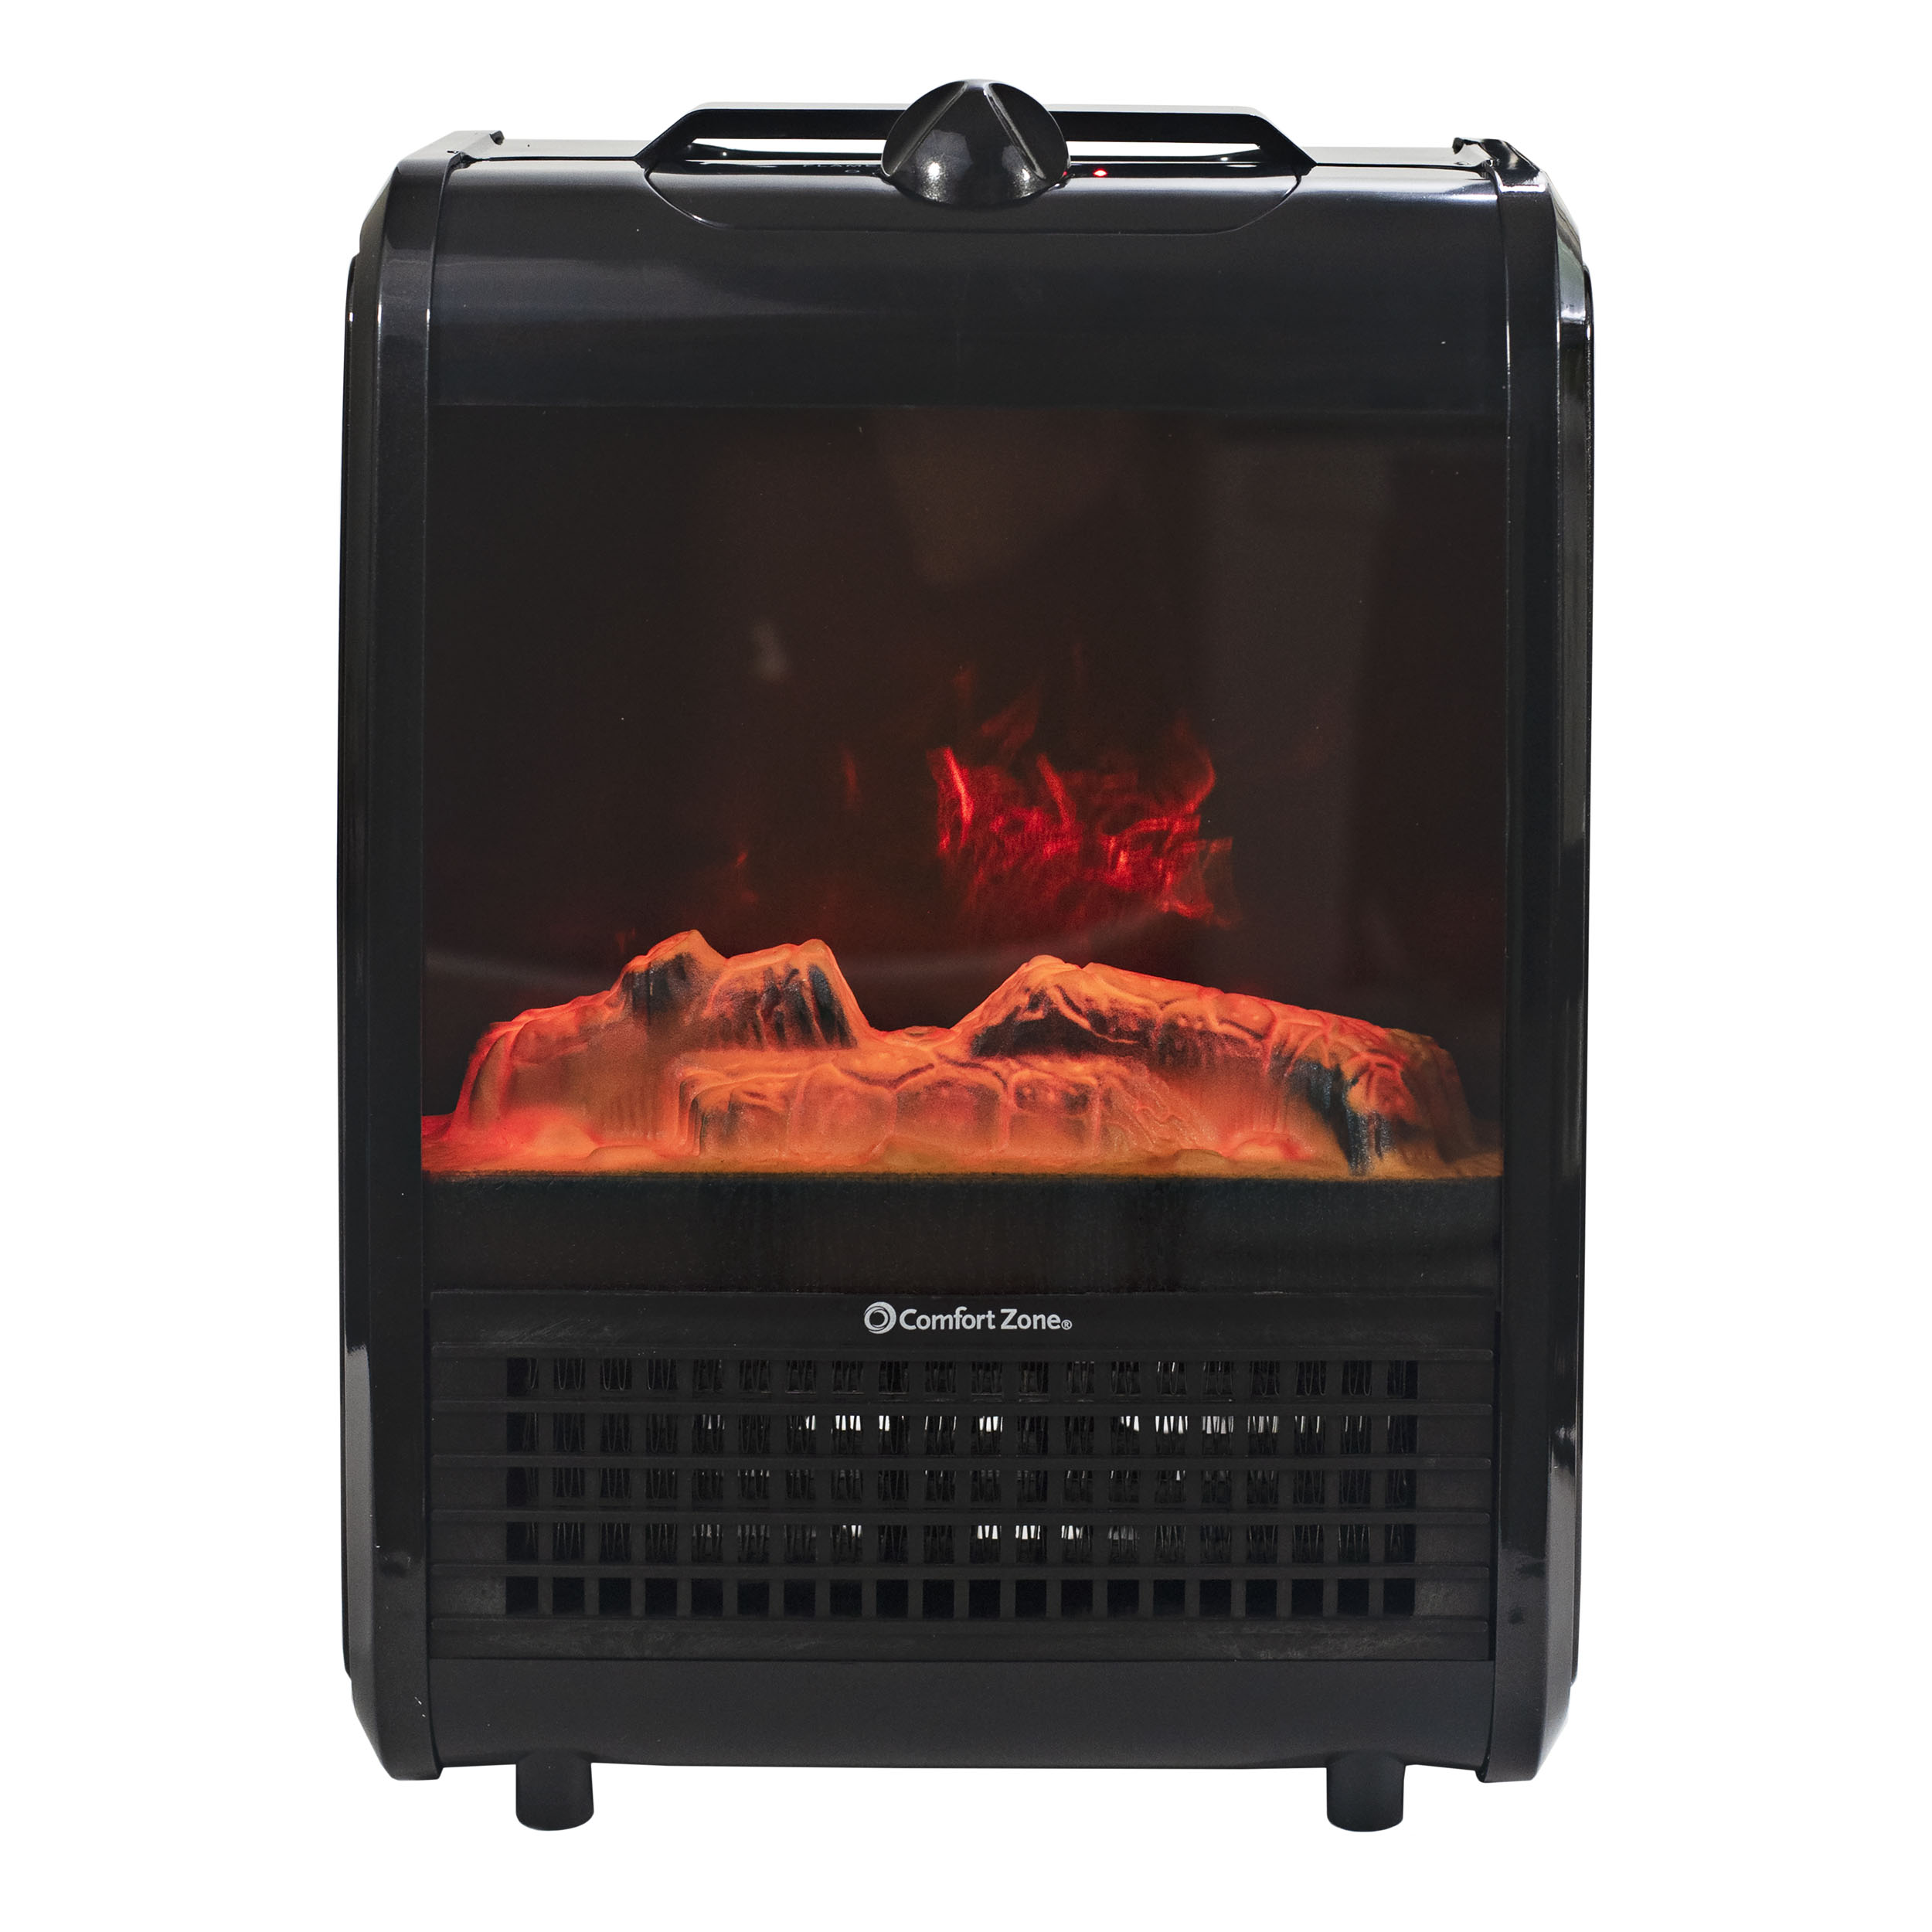 Comfort Zone 1200W Ceramic Electric Fireplace Heater, Black - image 1 of 9